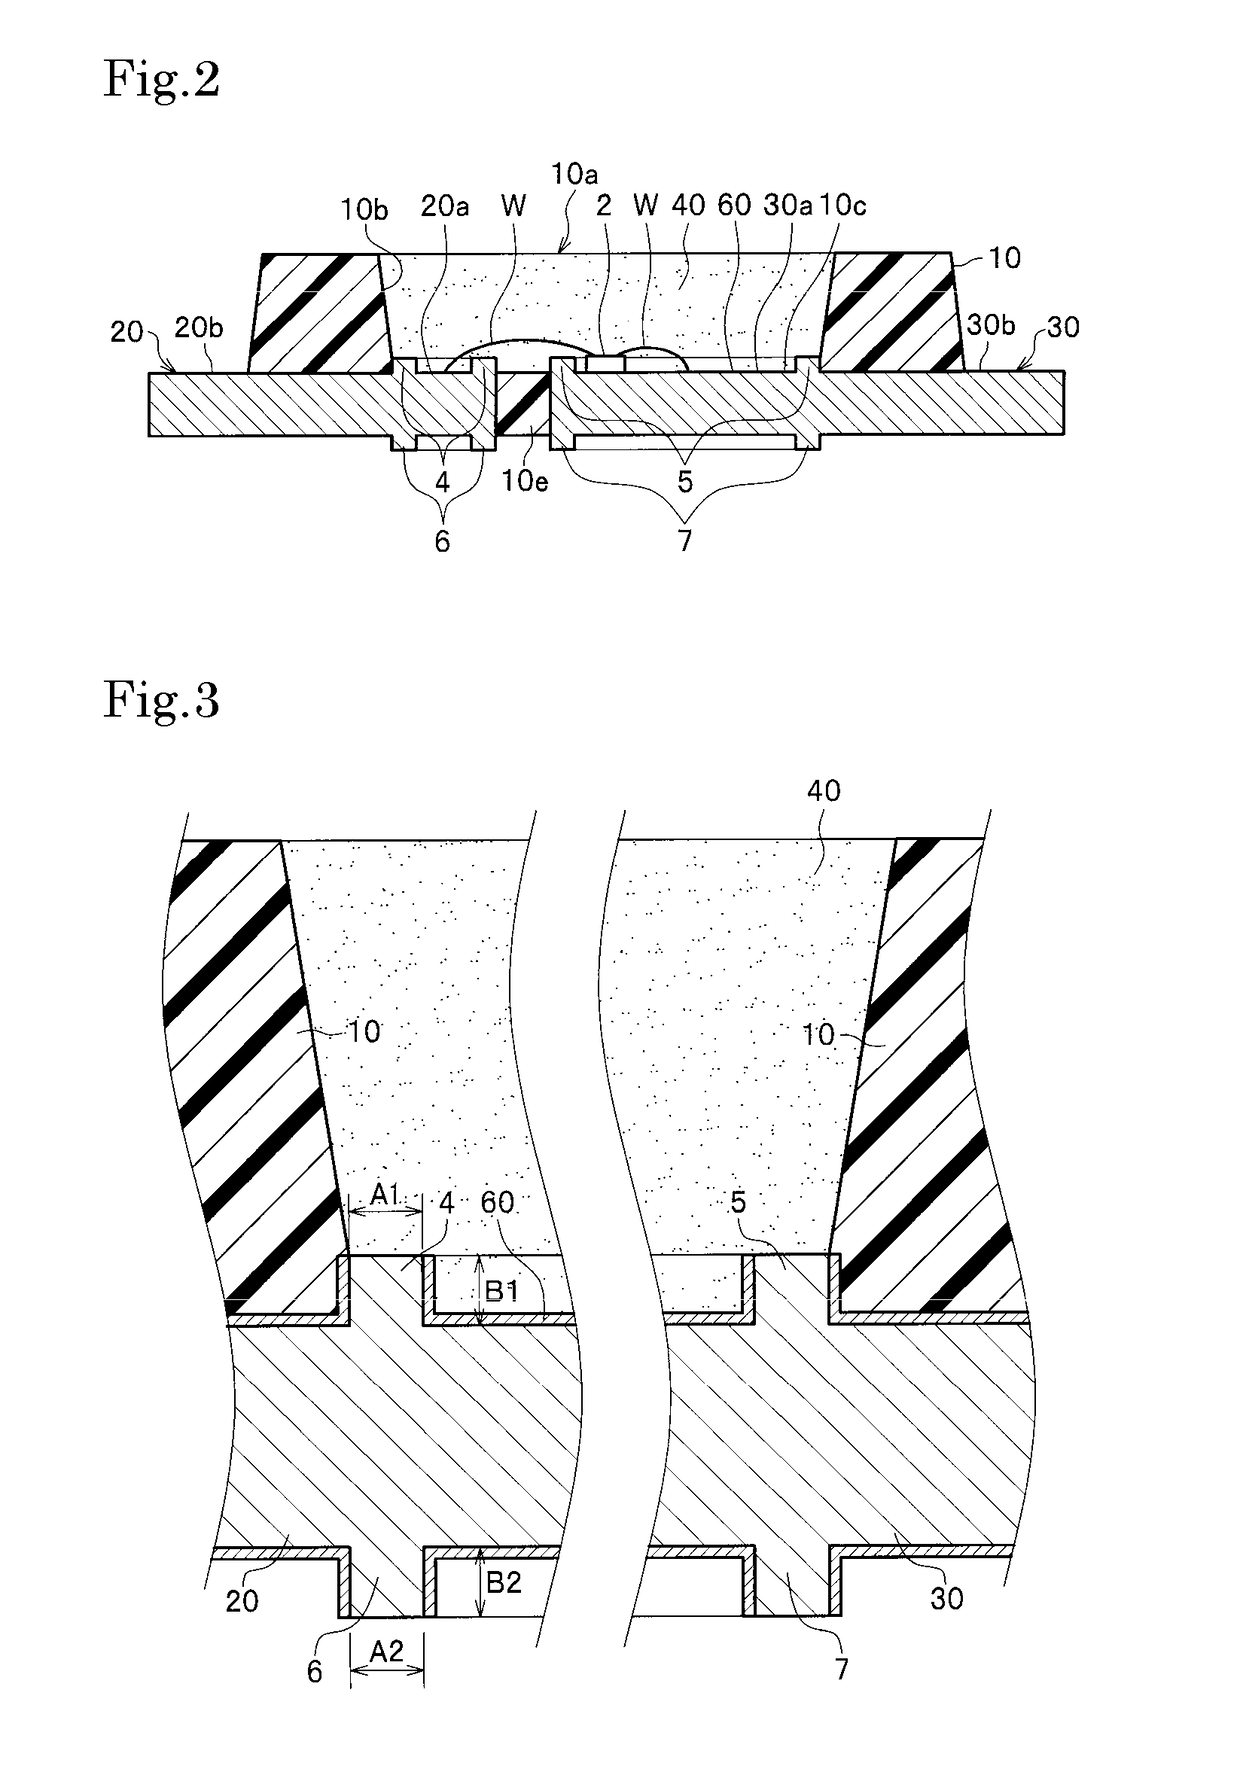 Package, light emitting device, and methods of manufacturing the package and the light emitting device